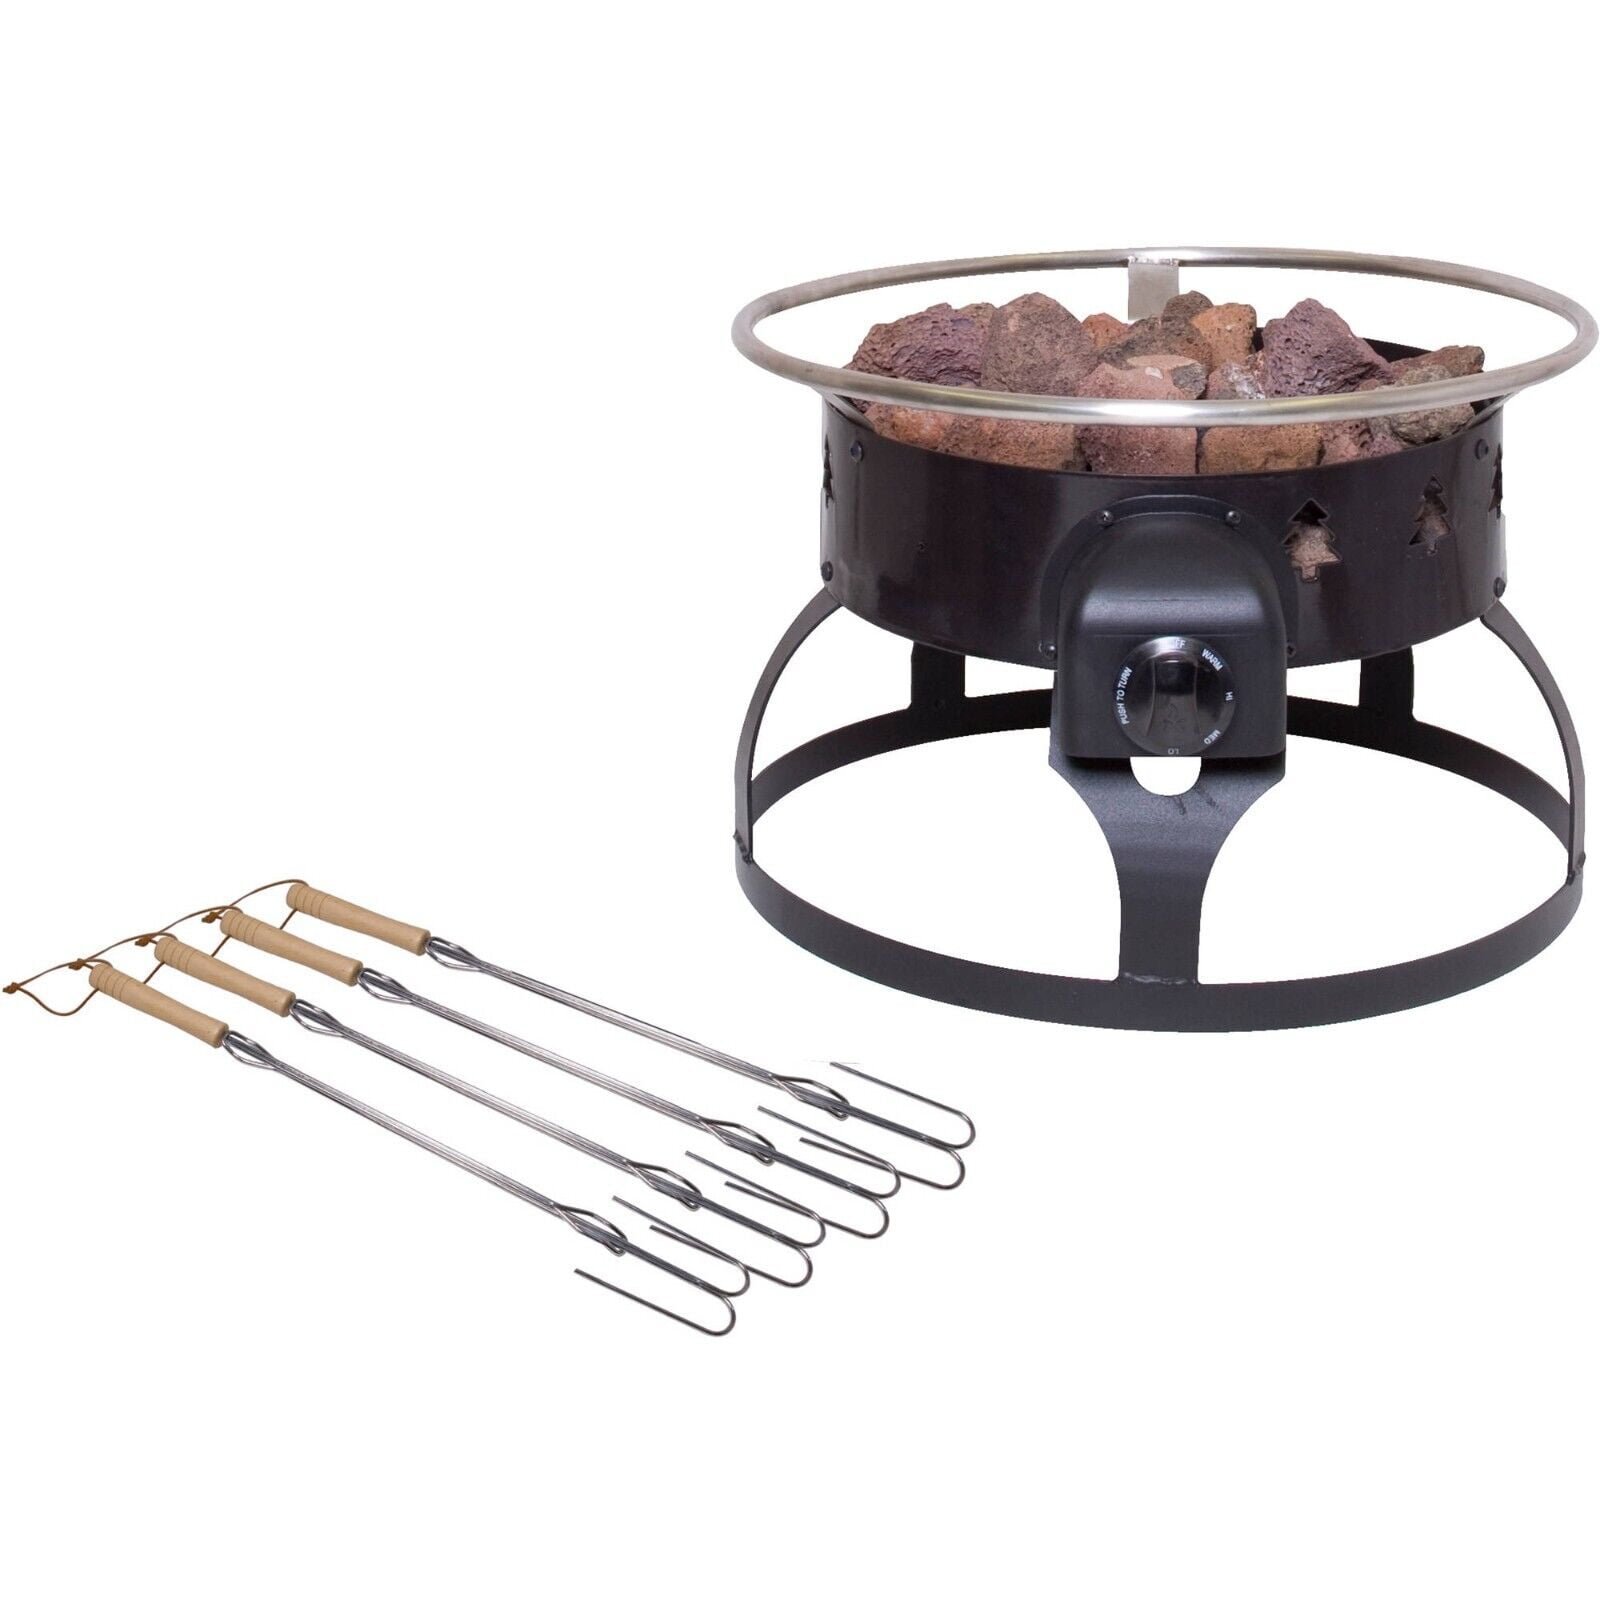 Camp Chef Redwood Portable Propane Fire Pit Bowl Outdoor Uniflame Fireplace New 